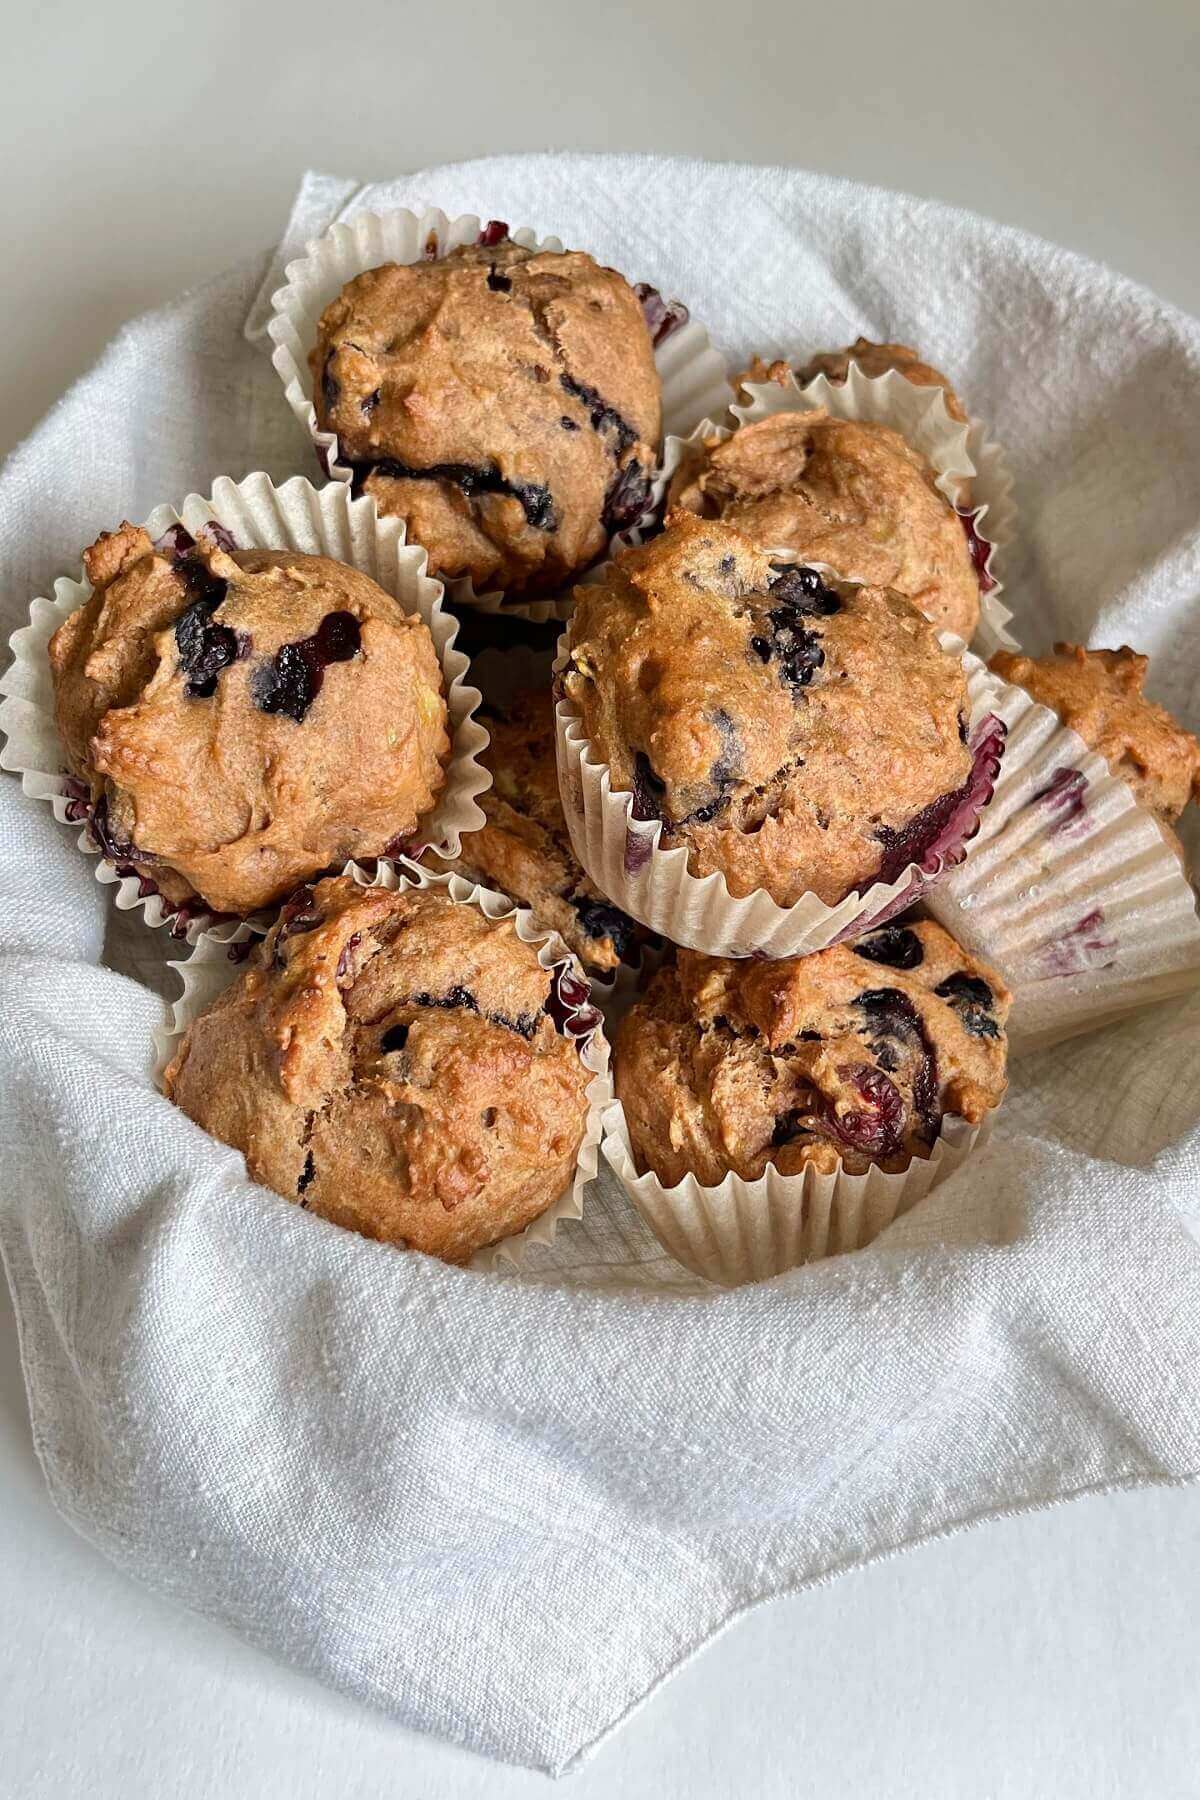 Banana blueberry muffins in a basket.